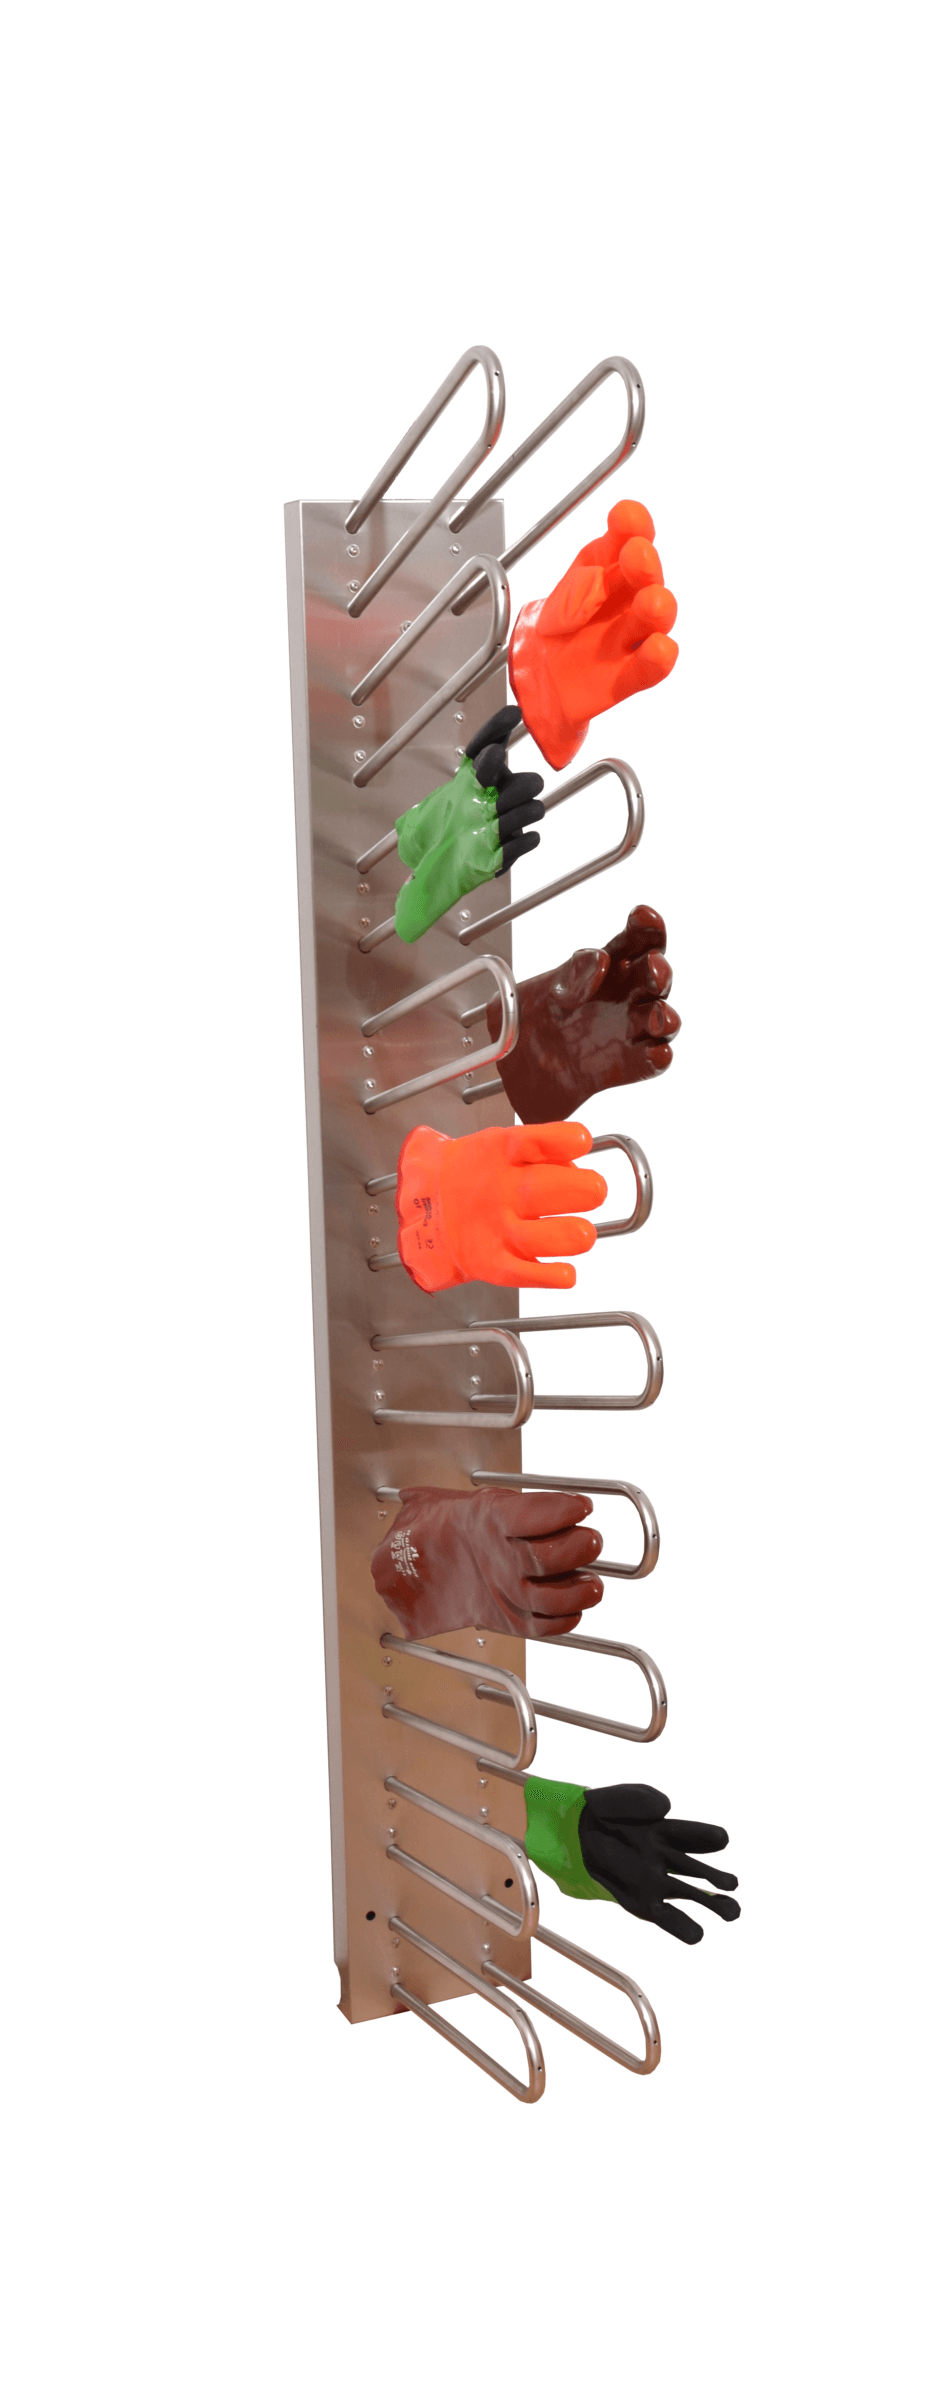 Electrical drying rack for quick drying of gloves